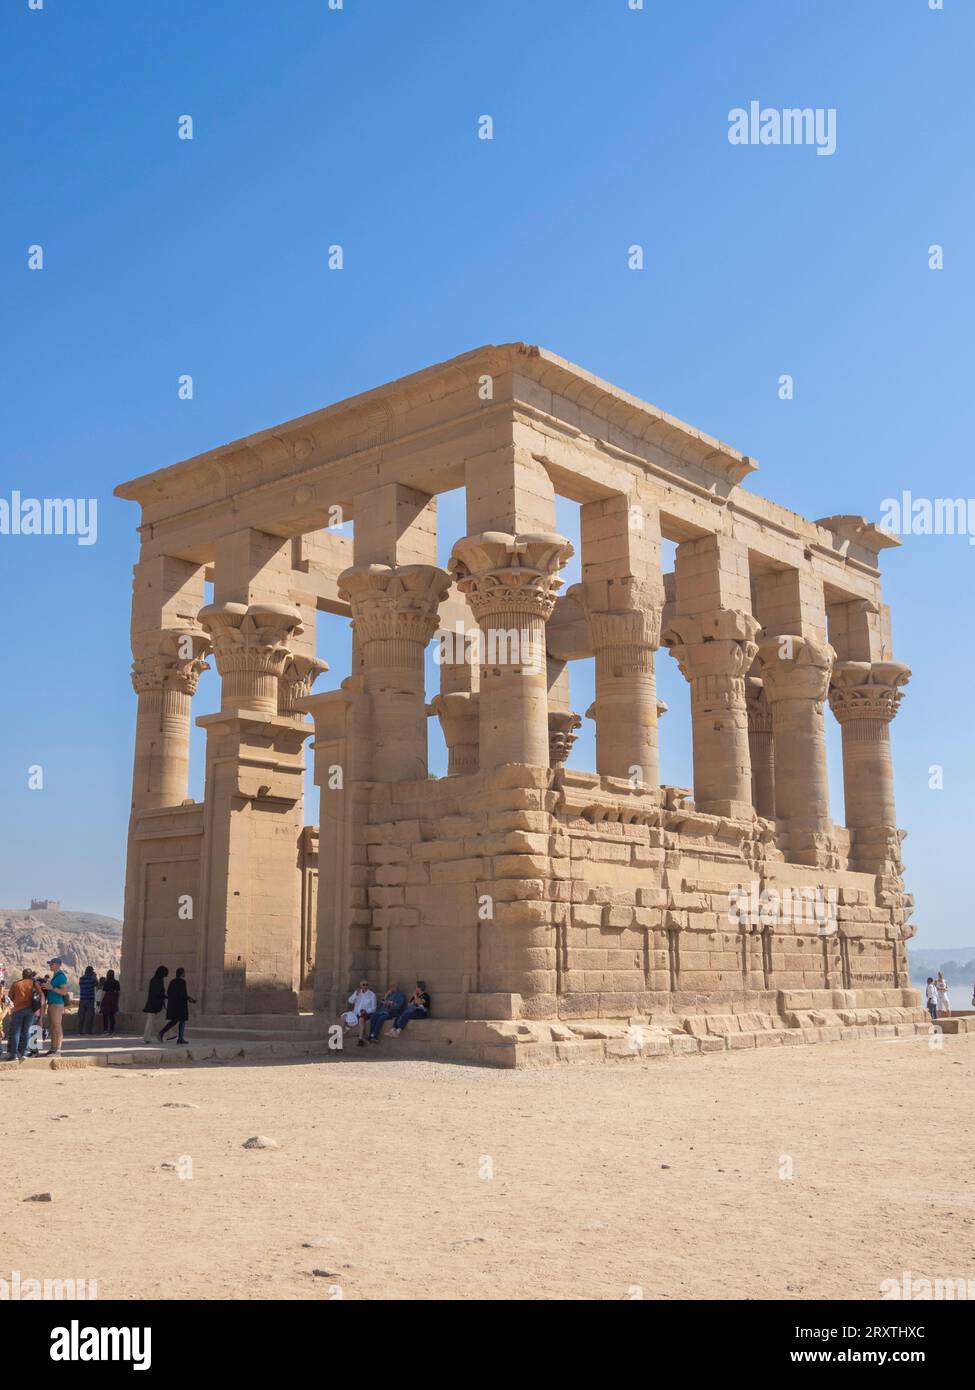 Columns at the Philae temple complex, The Temple of Isis, UNESCO World Heritage Site, currently on the island of Agilkia, Egypt, North Africa, Africa Stock Photo